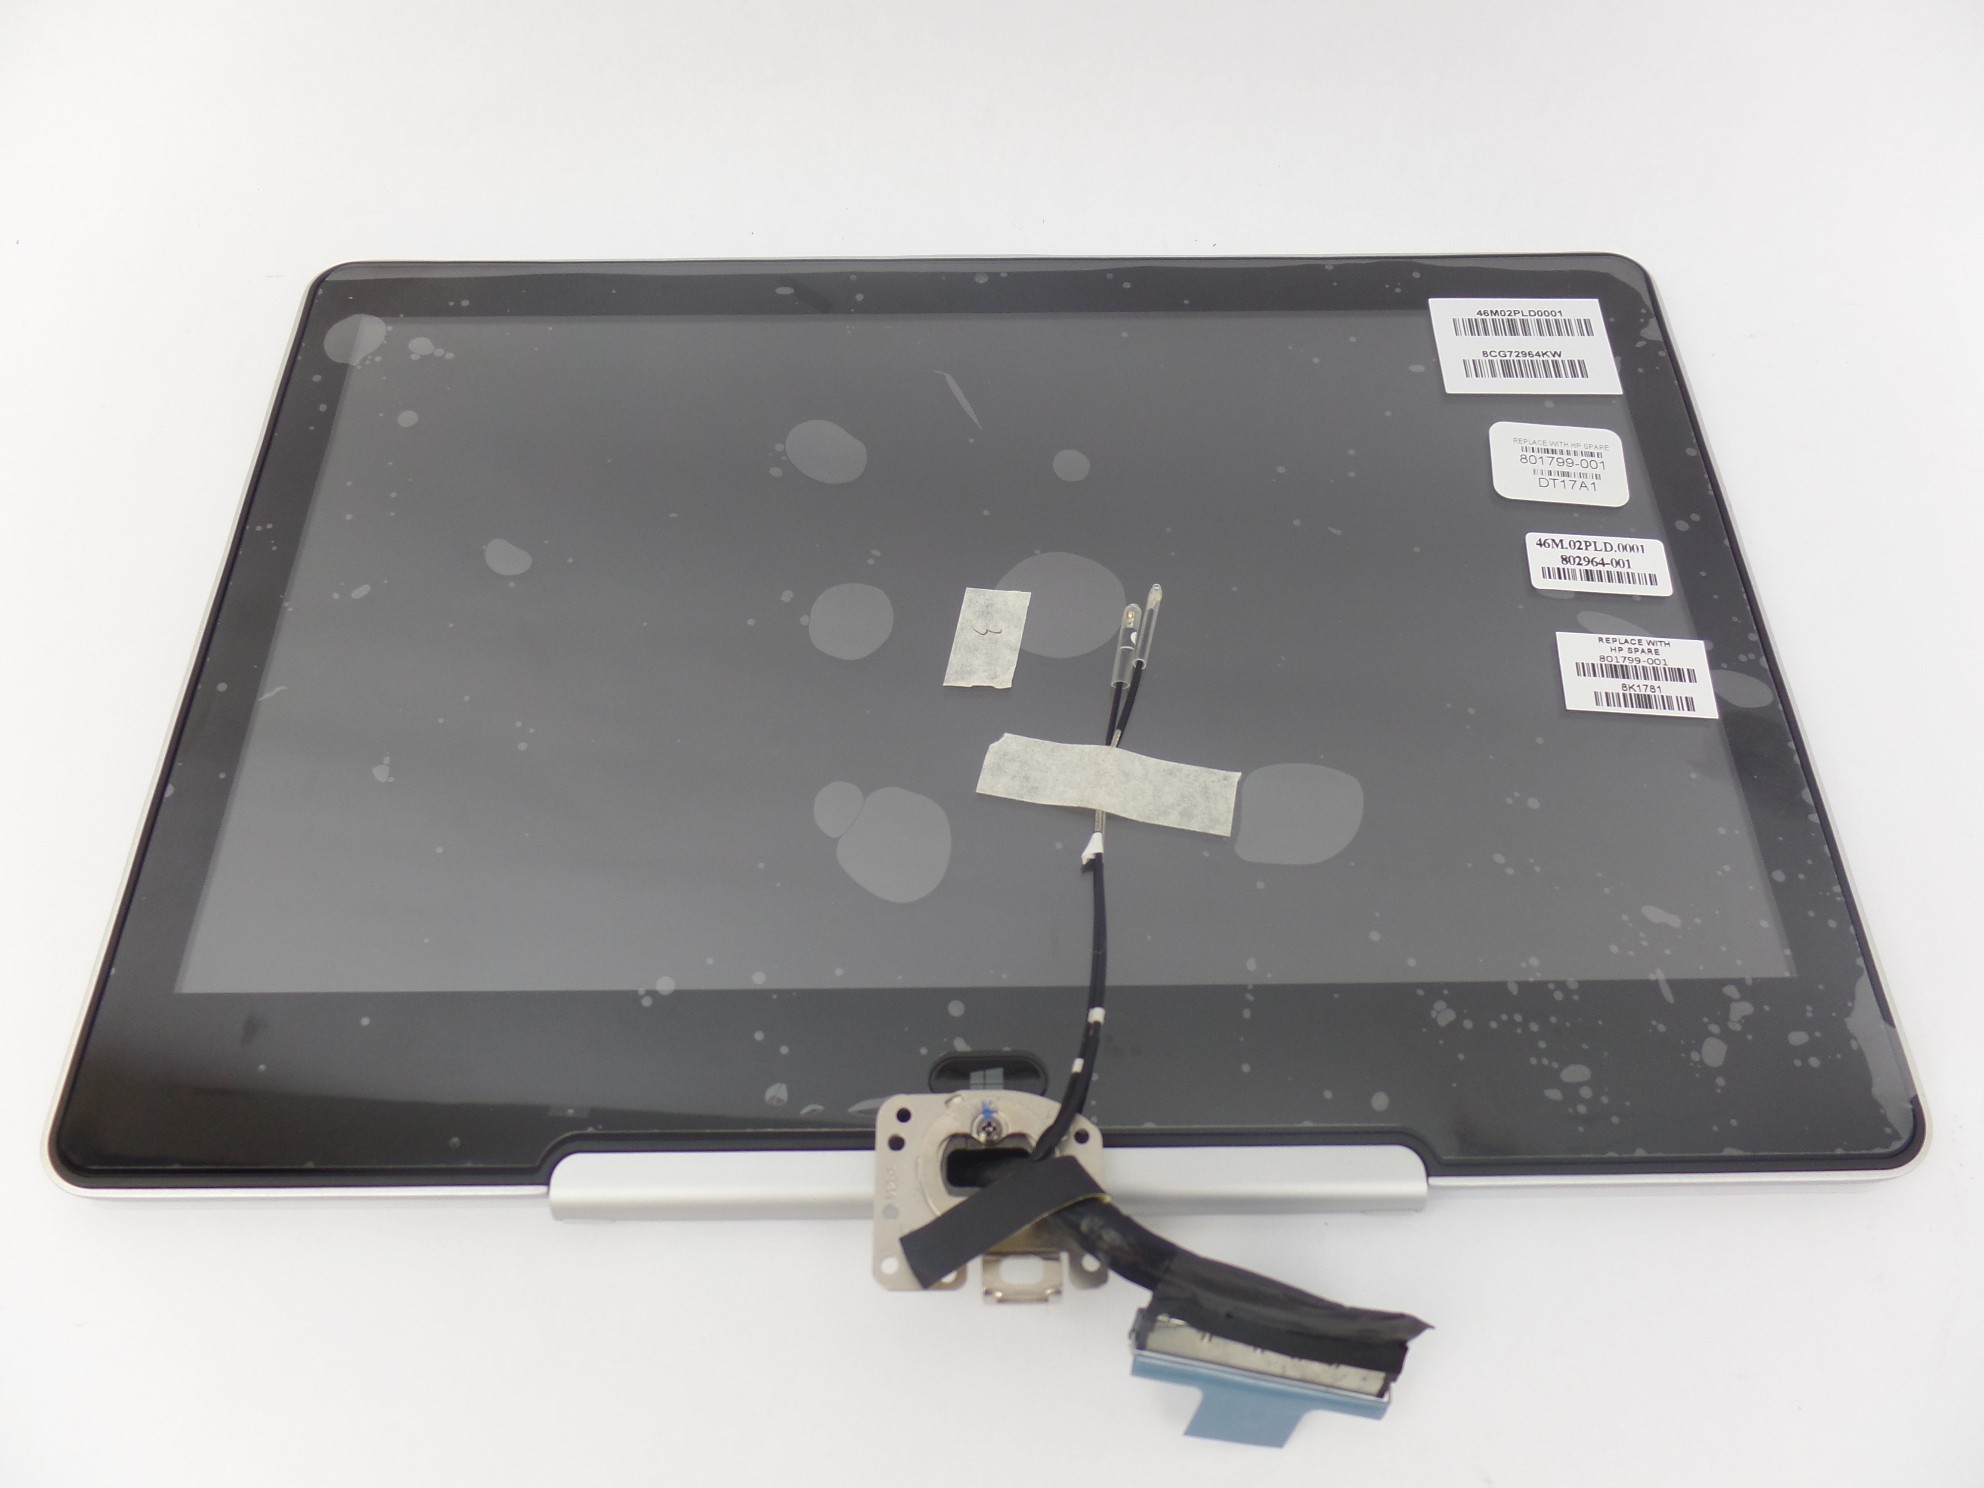 11.6" LCD TouchScreen Assembly 801799-001 802964-001 for HP Revolve 810 G2 G3